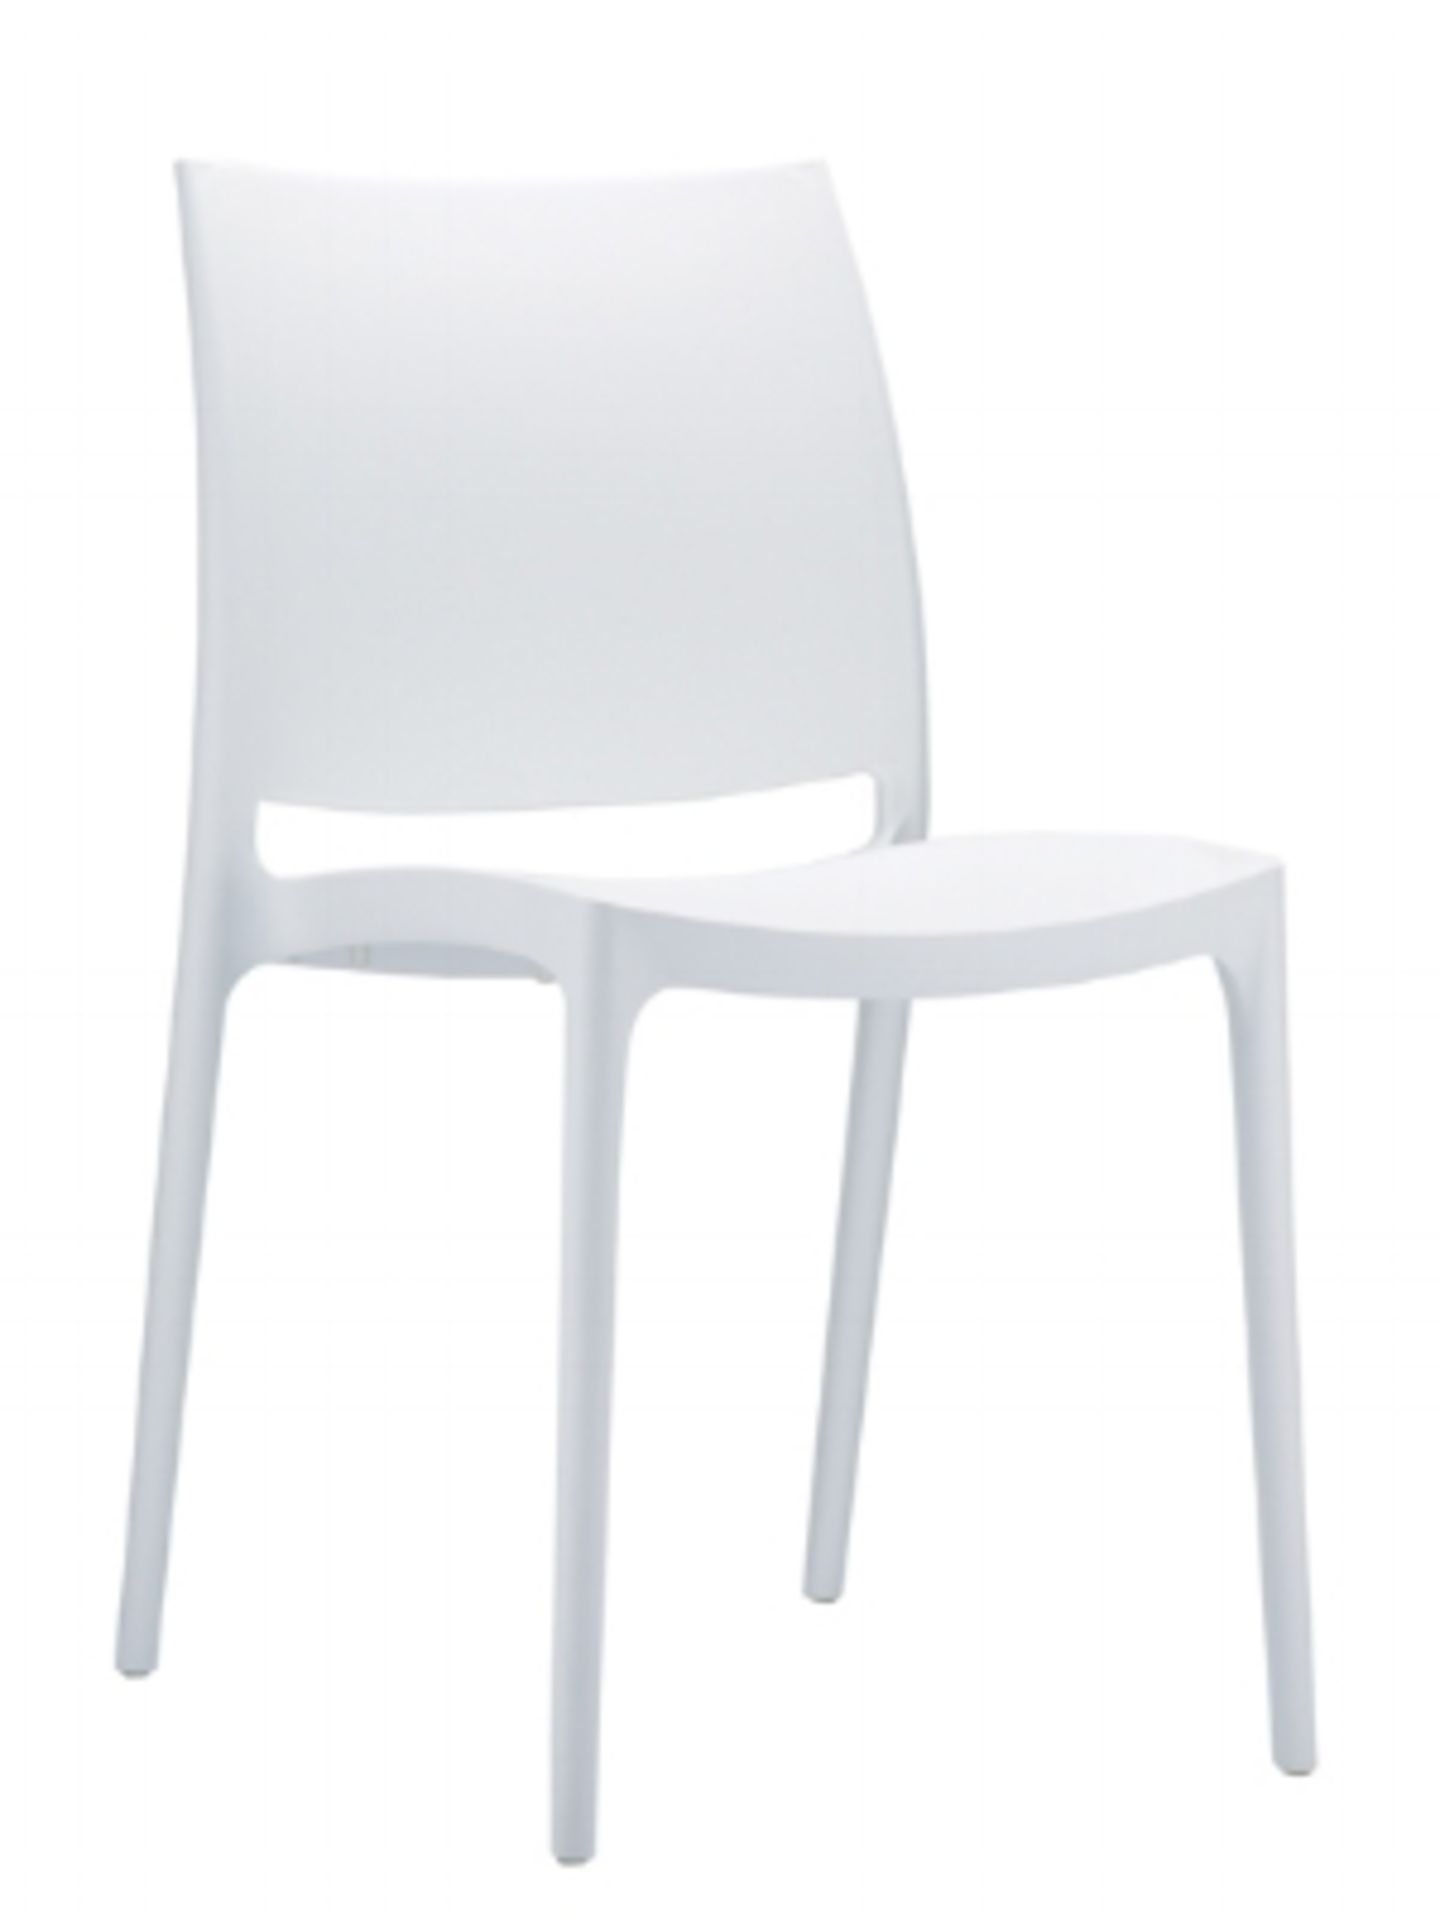 Martinique side chair - white, 4 total.